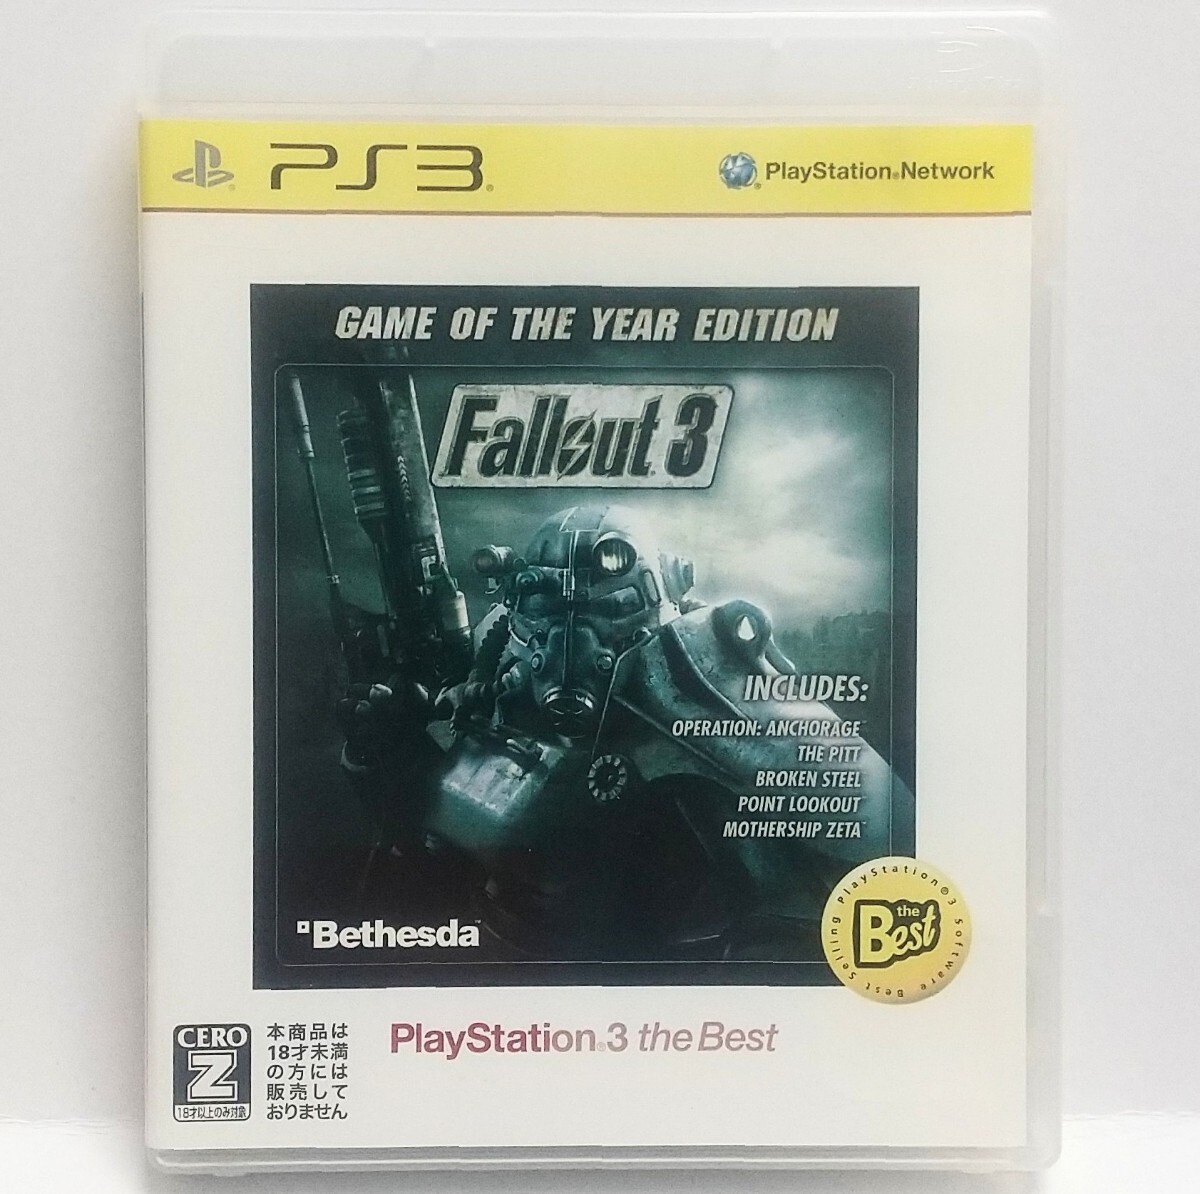 PS3　Fallout3 GAME OF THE YEAR EDITION [Playstation3 the Best]　　[送料185円～ 計2本まで単一送料同梱可(匿名配送有)]_画像1